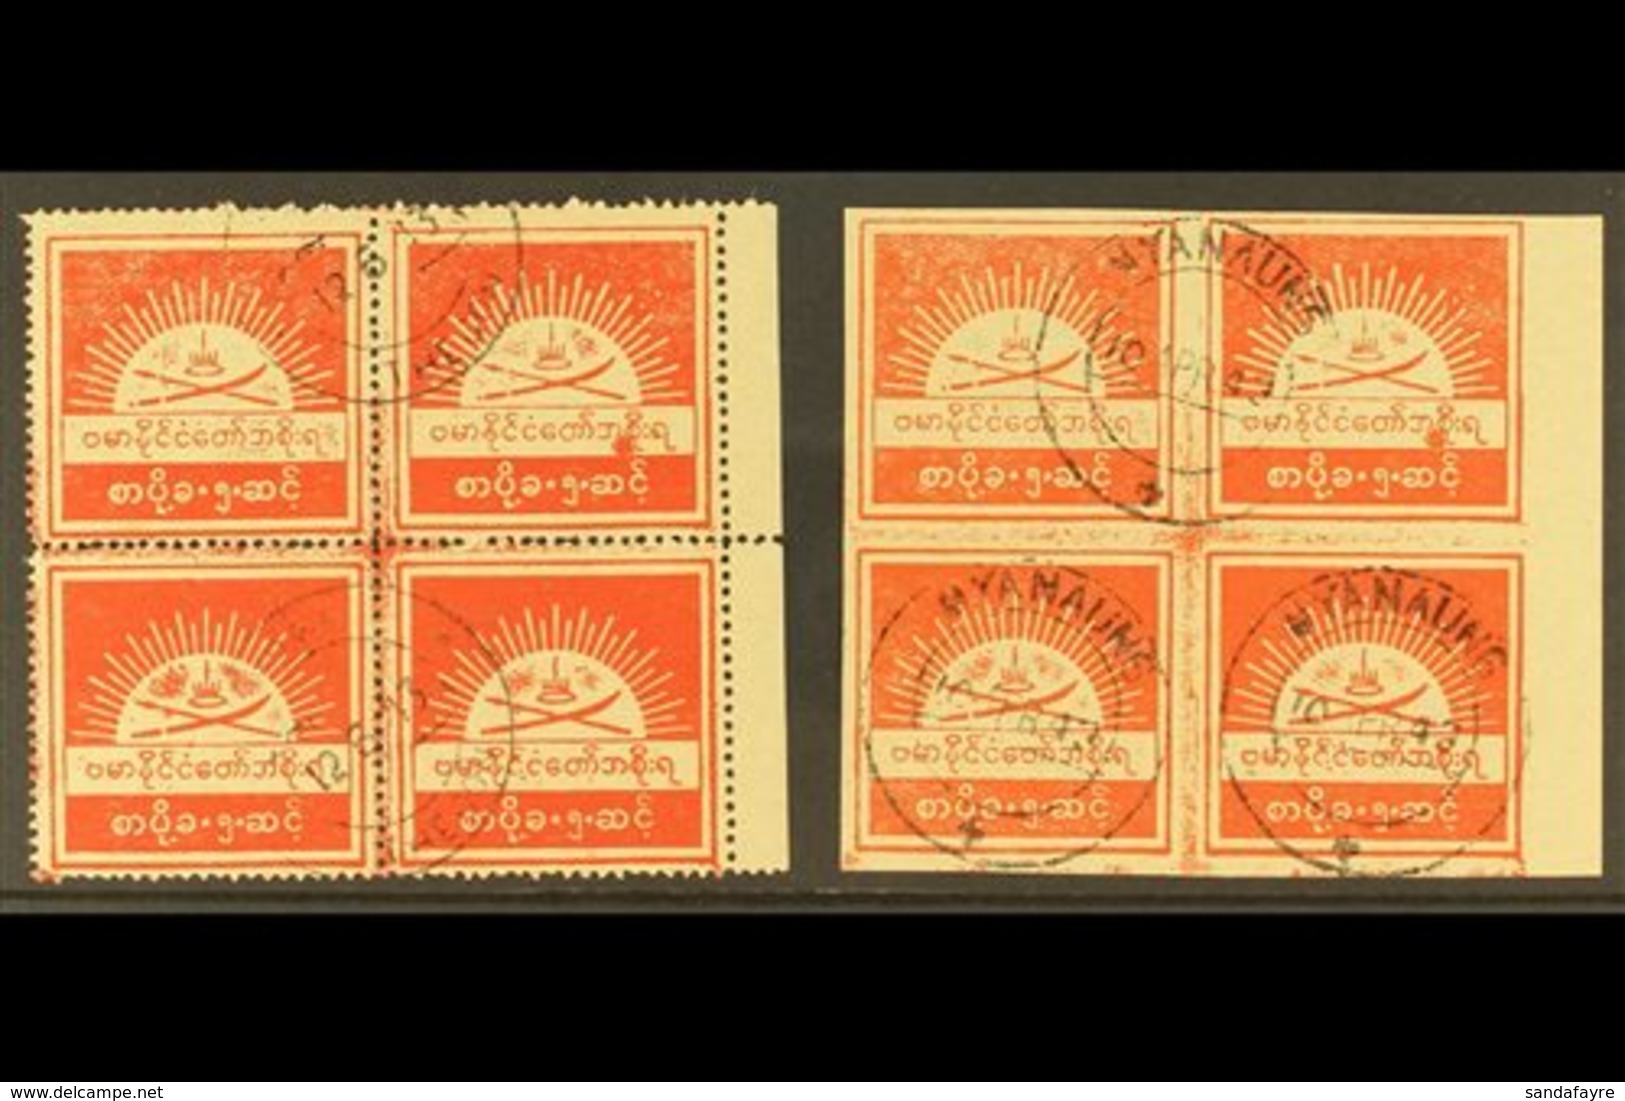 1943 (Feb) 5c Scarlet Burma State Crest Matching PERF & IMPERF. BLOCKS OF FOUR, SG J72/72a, Used. Some Perfs Separating. - Birmanie (...-1947)